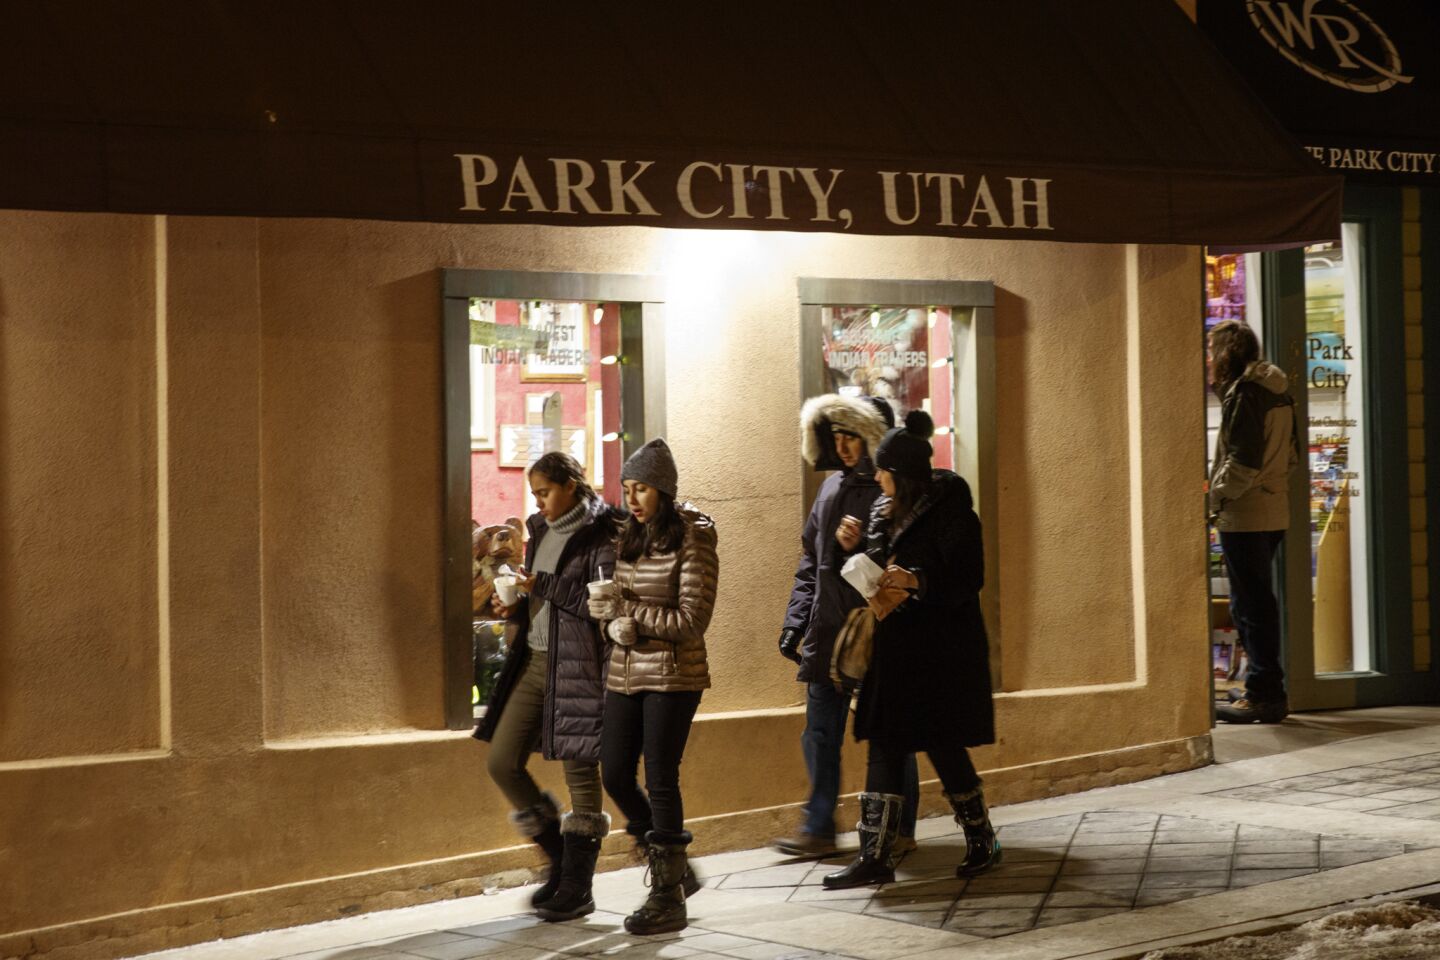 People are bundled up as temperatures dropped below 20 degrees along Main Street in Park City, Utah, as the start of the Sundance Film Festival approached.